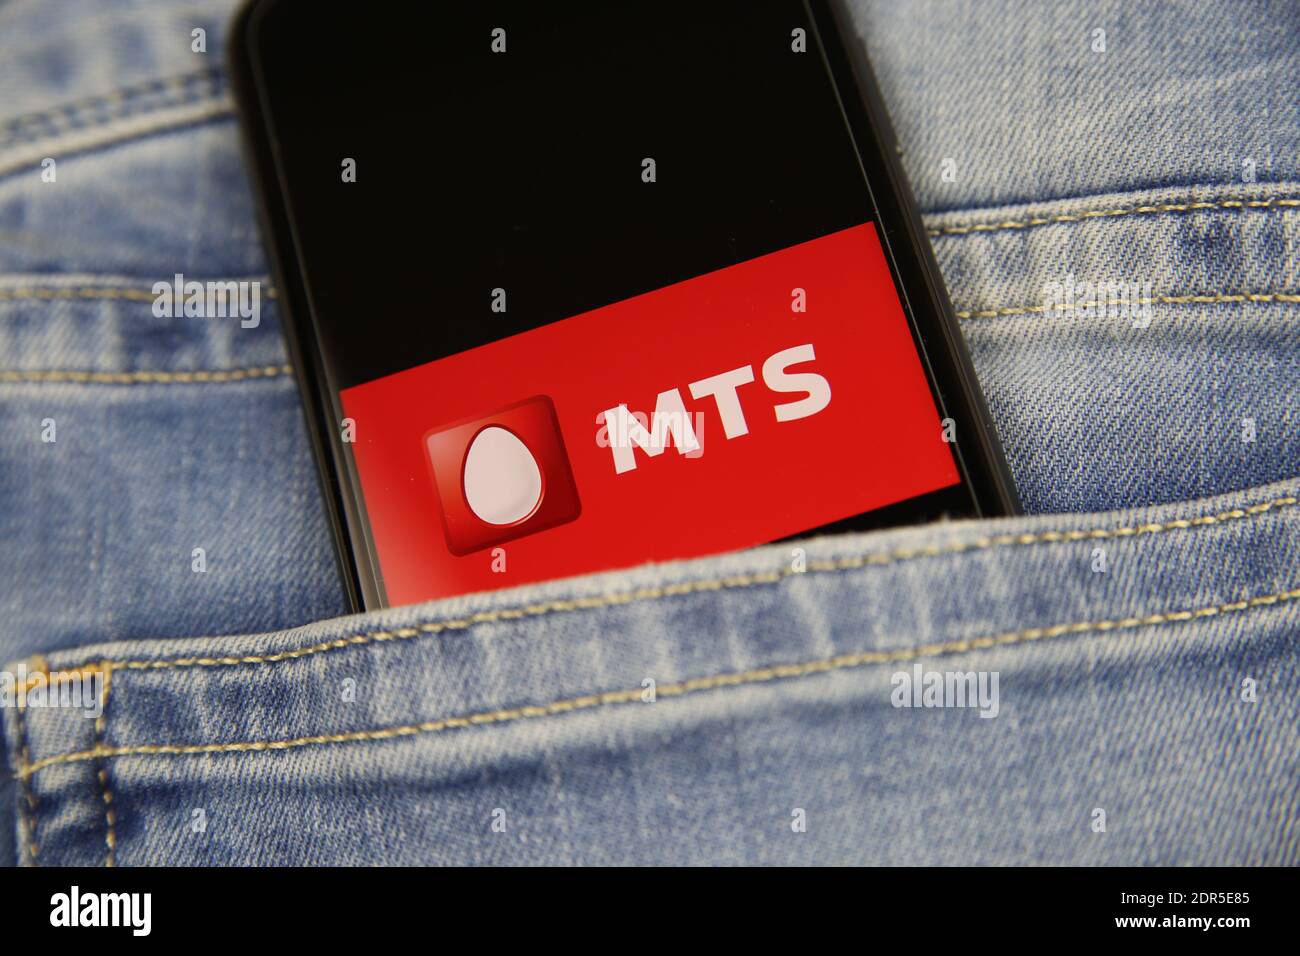 Viersen, Germany - May 9. 2020: Close up of smartphone screen in blue jeans pocket with logo lettering of russian mobile phone provider MTS Telesystem Stock Photo